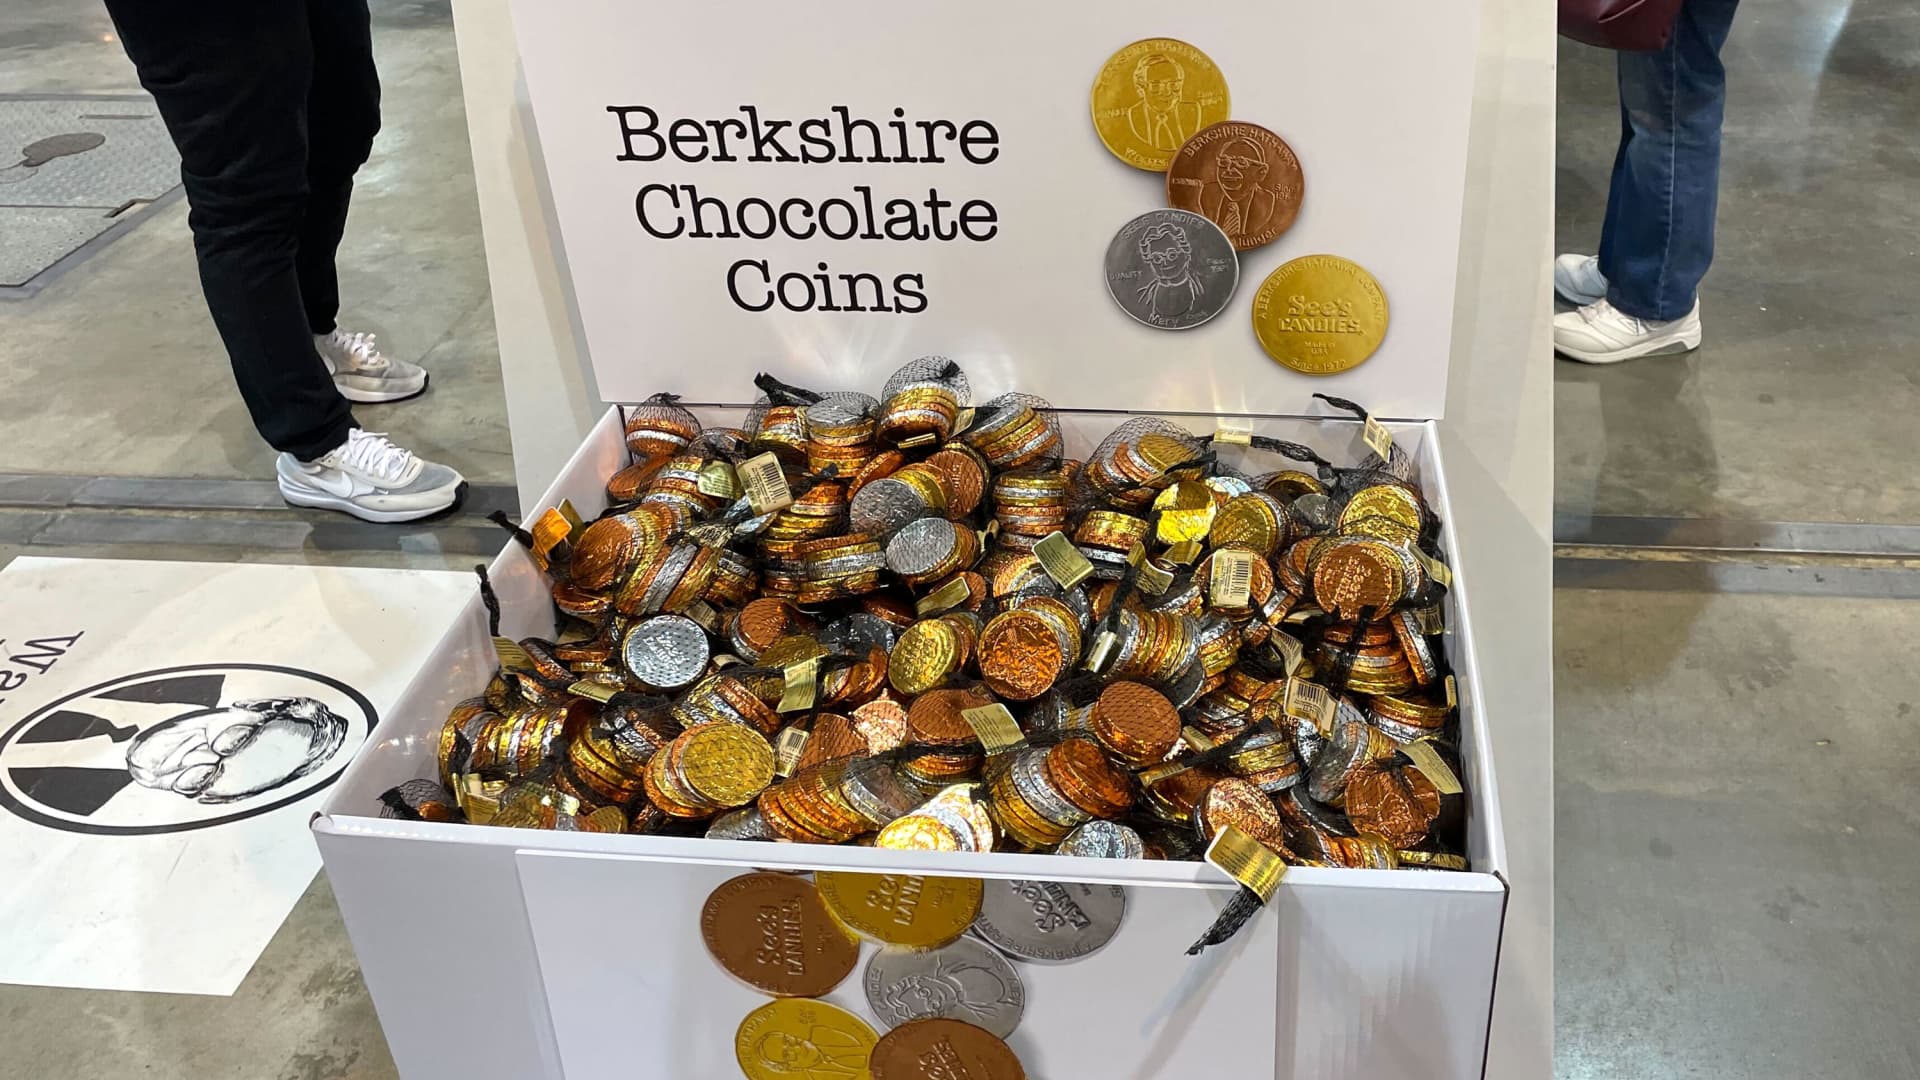 A display showing chocolate coins at the Berkshire Hathaway Annual Shareholder Meeting in Omaha, Nebraska.